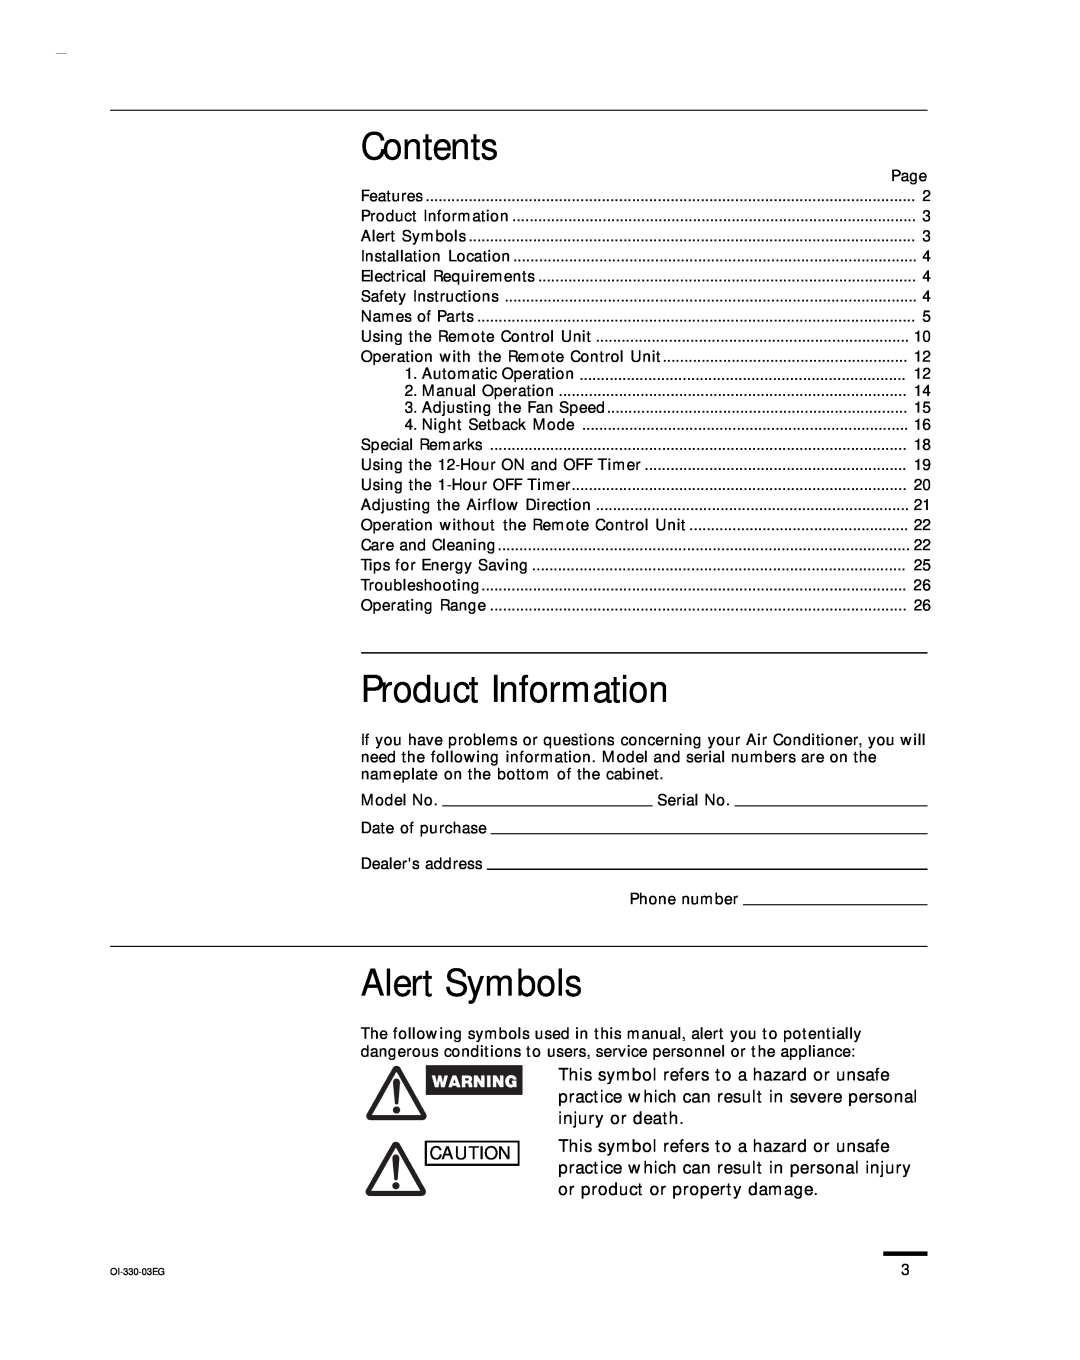 Sanyo KHS1852-S, CH1852, CH0952 service manual Contents, Product Information, Alert Symbols 